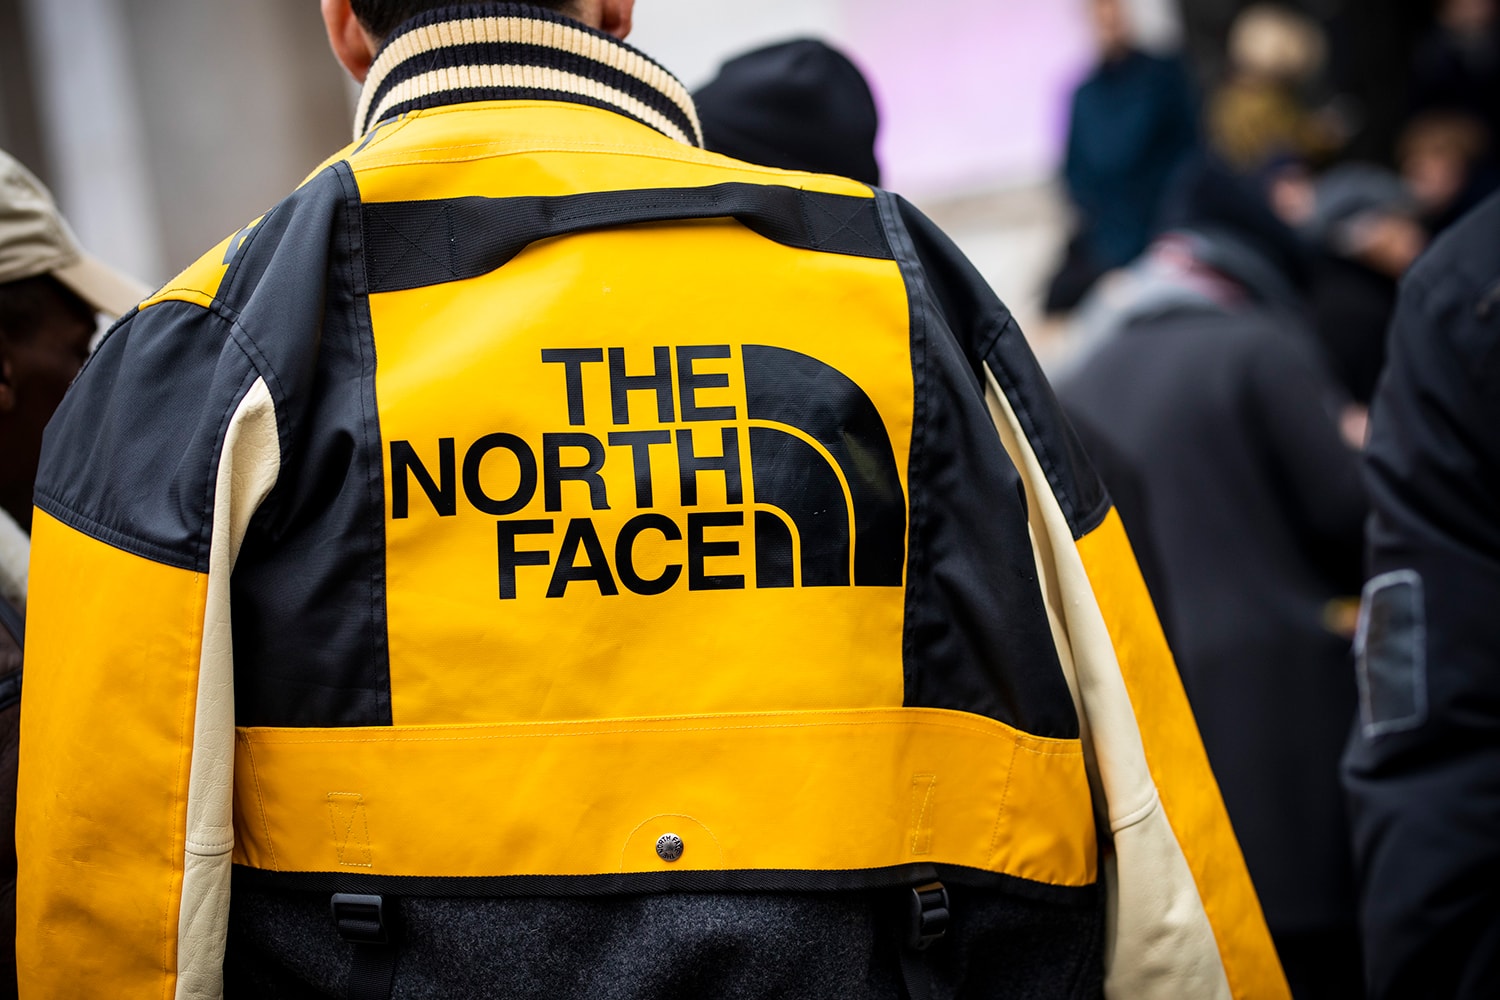 The North Face Wikipedia Defacing Campaign Response AdAge marketing advertising clothing outdoors photography 